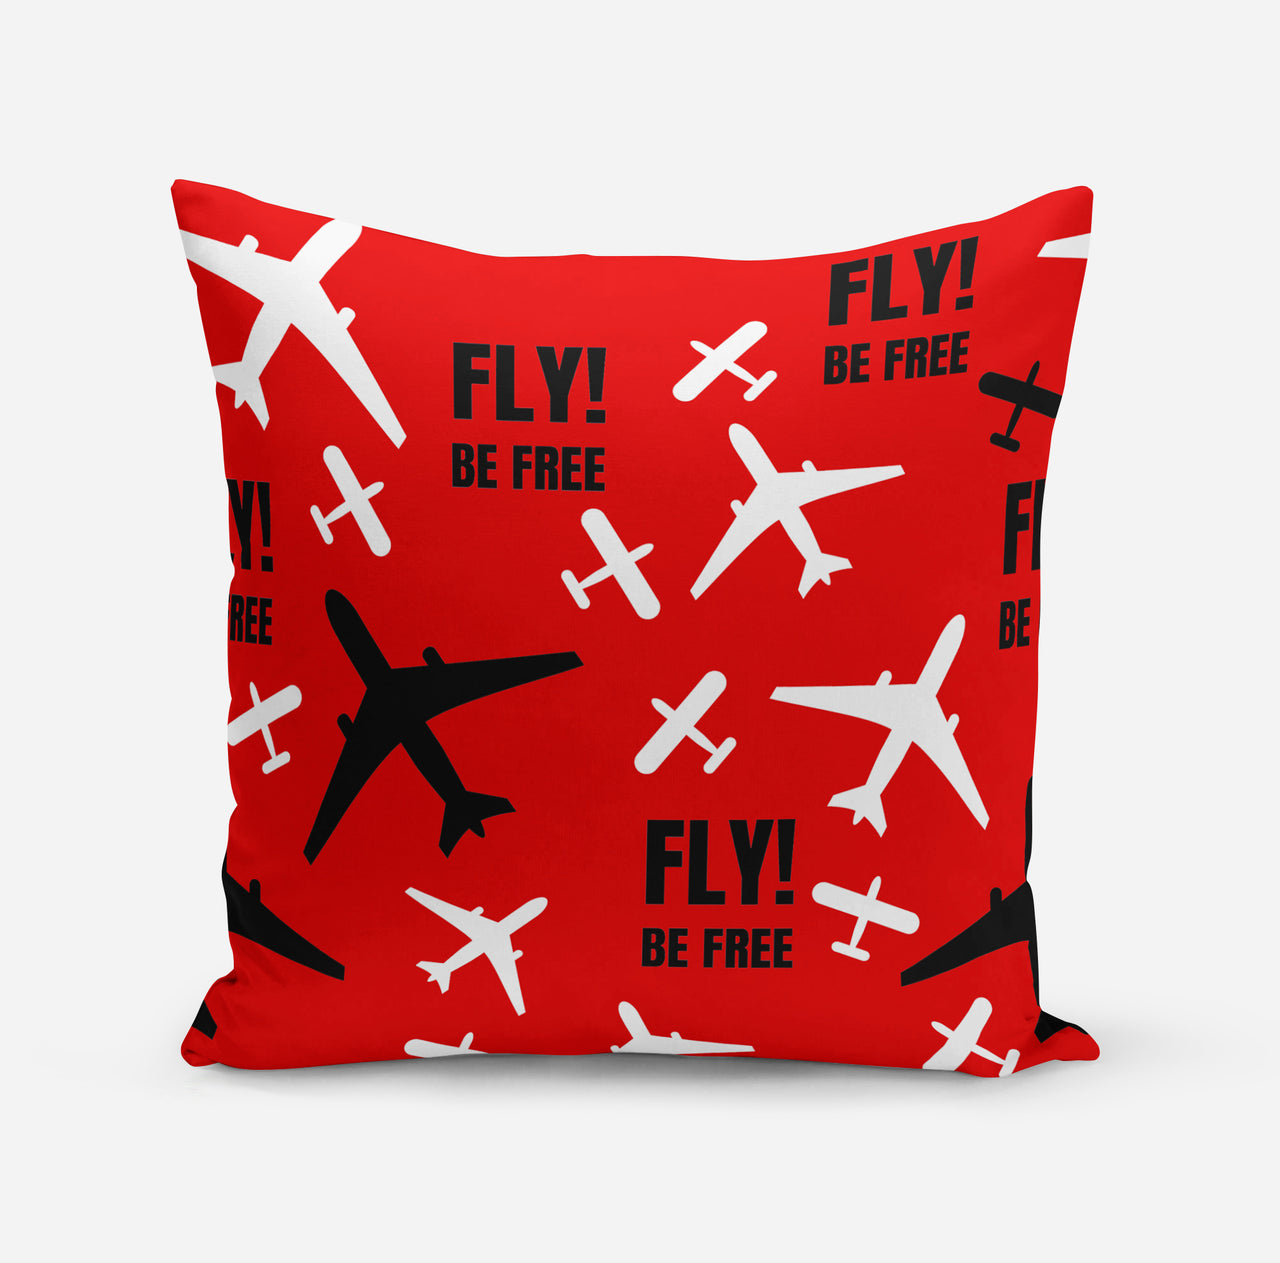 Fly Be Free Red Designed Pillows